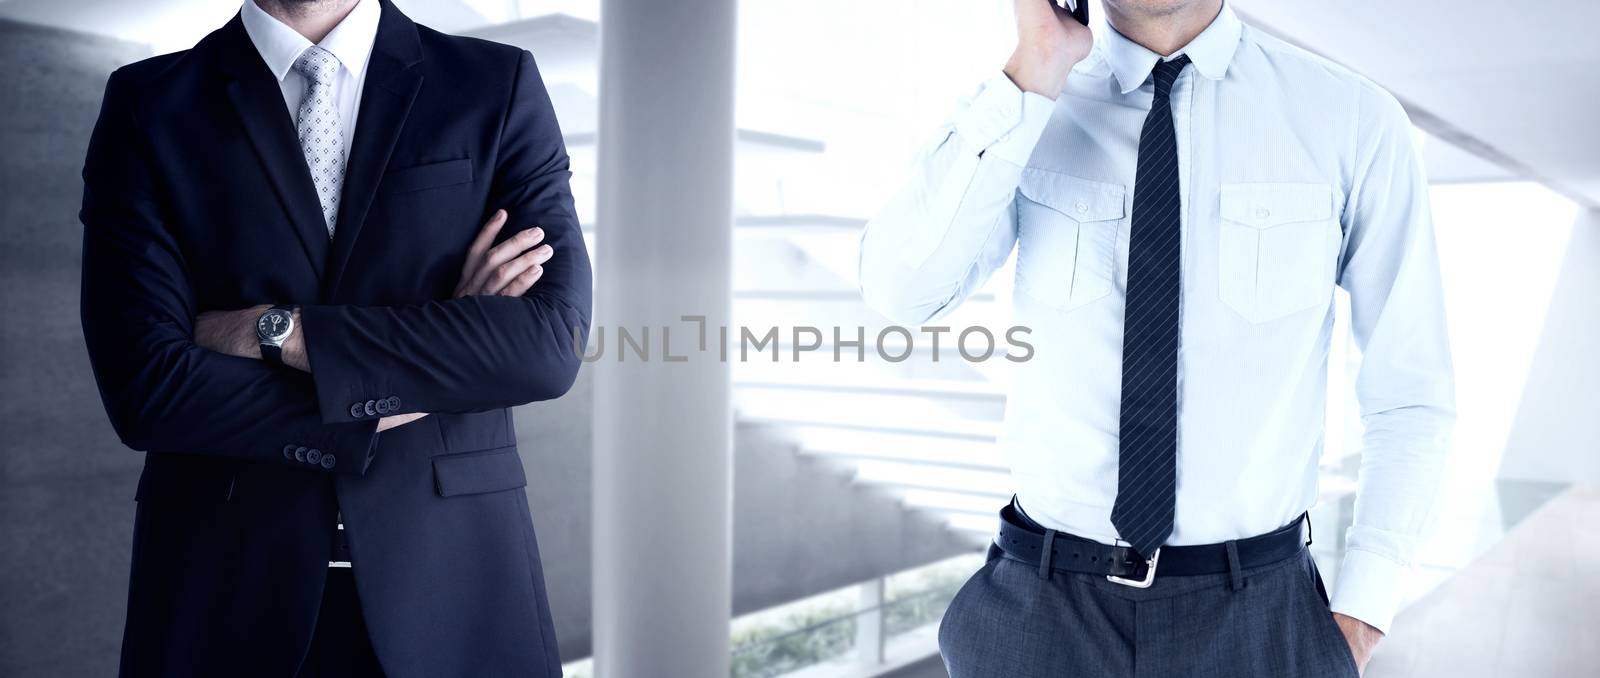 Businessman on the phone against stylish modern home interior with staircase